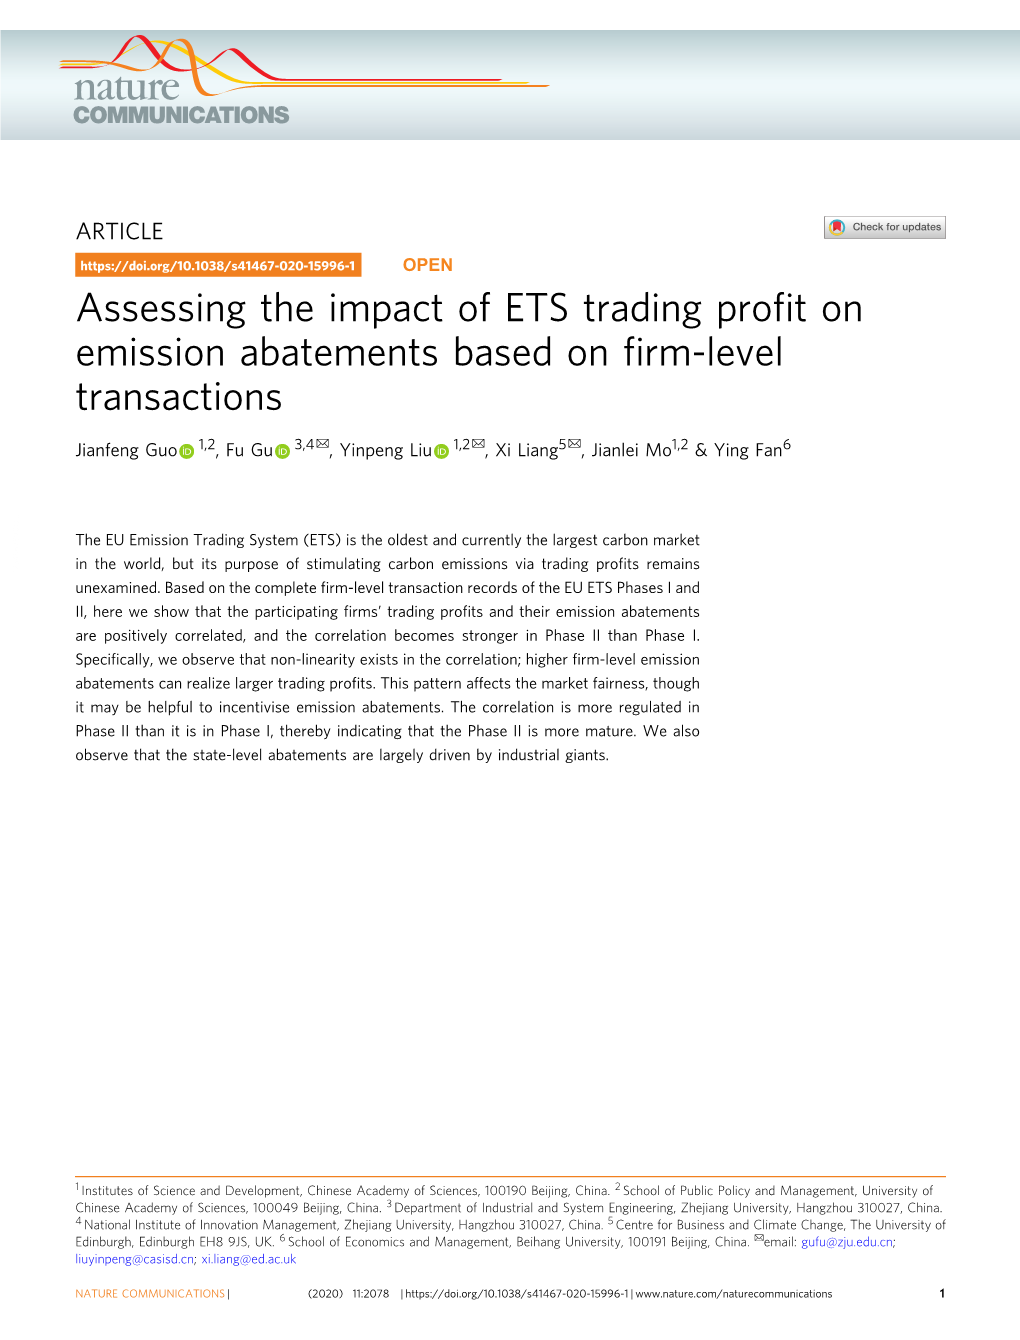 Assessing the Impact of ETS Trading Profit on Emission Abatements